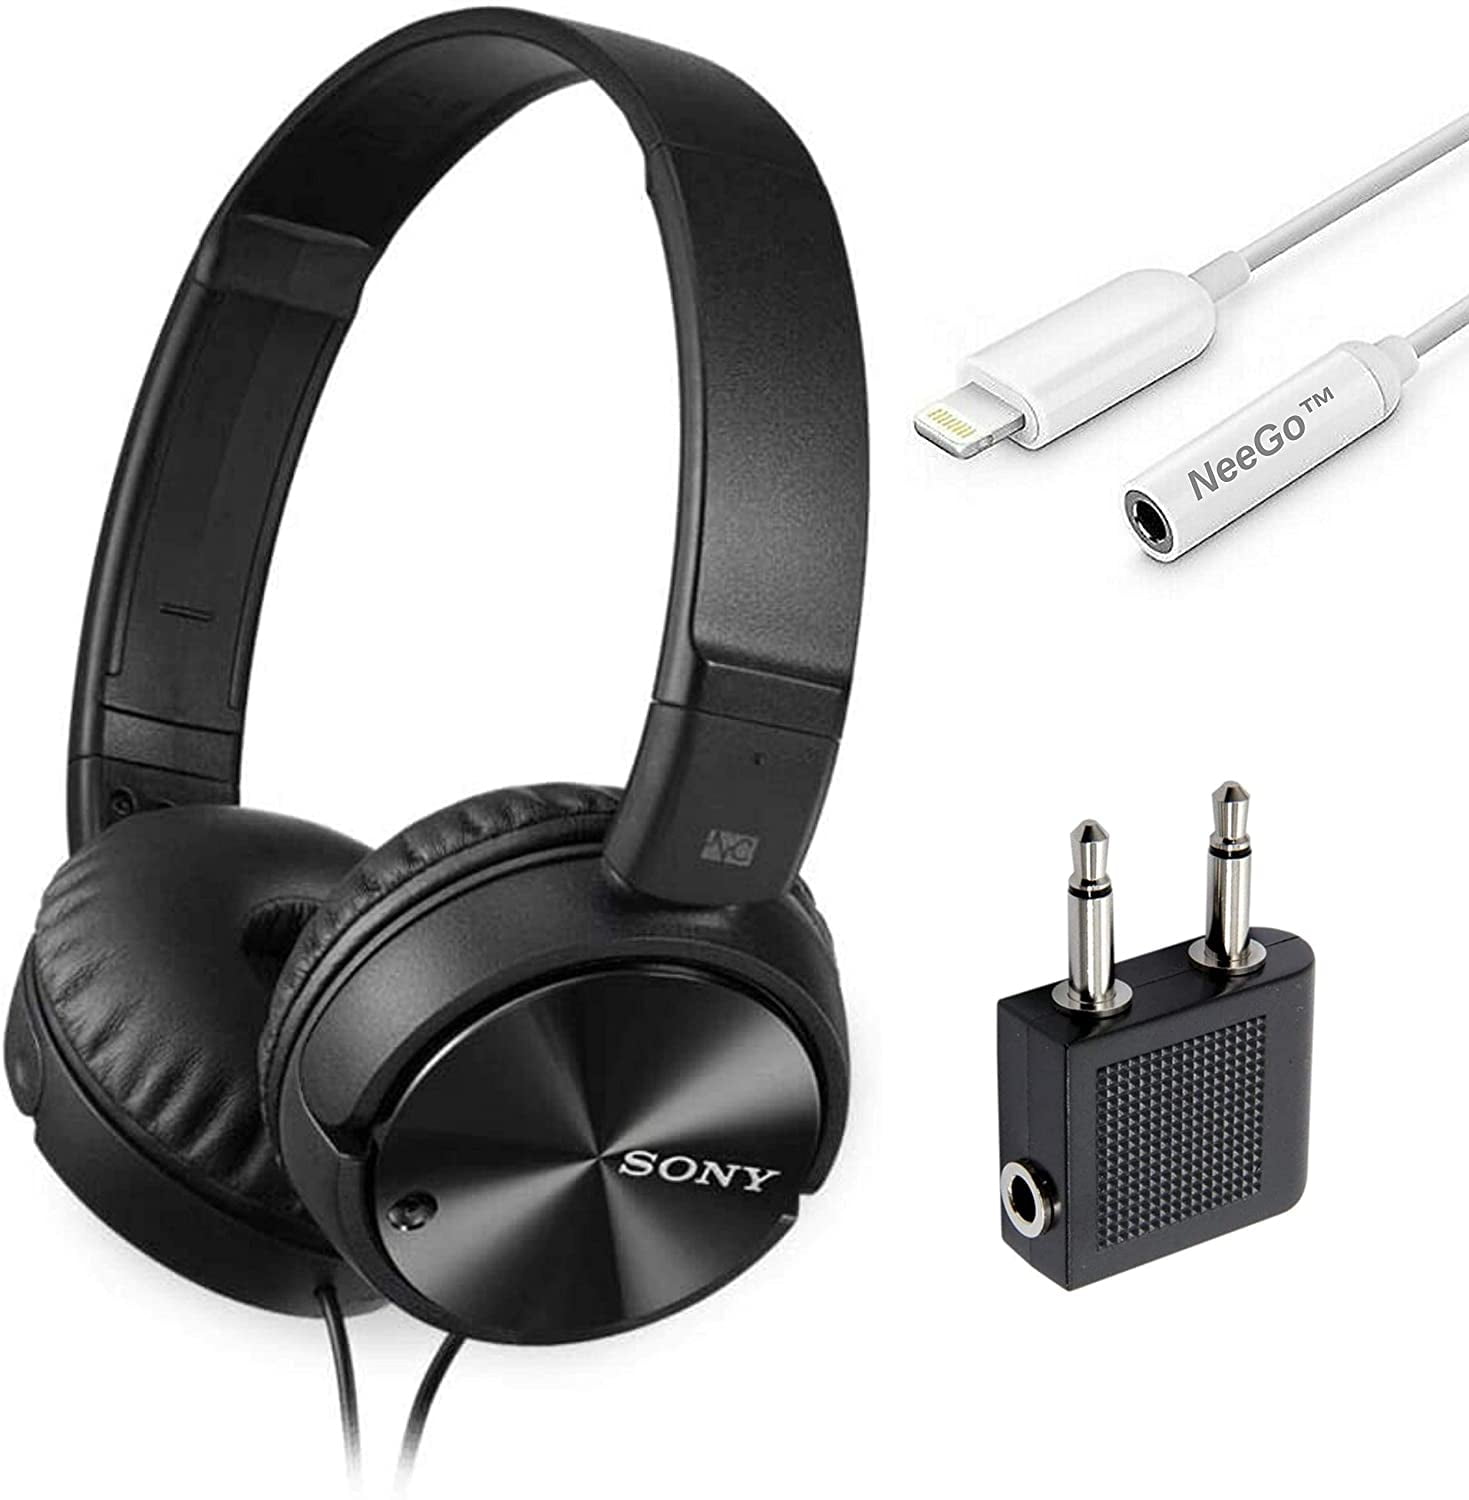 Sony Wired Noise Cancelling Stereo Headphones Black NeeGo 3.5mm Jack Converter for iPhone 